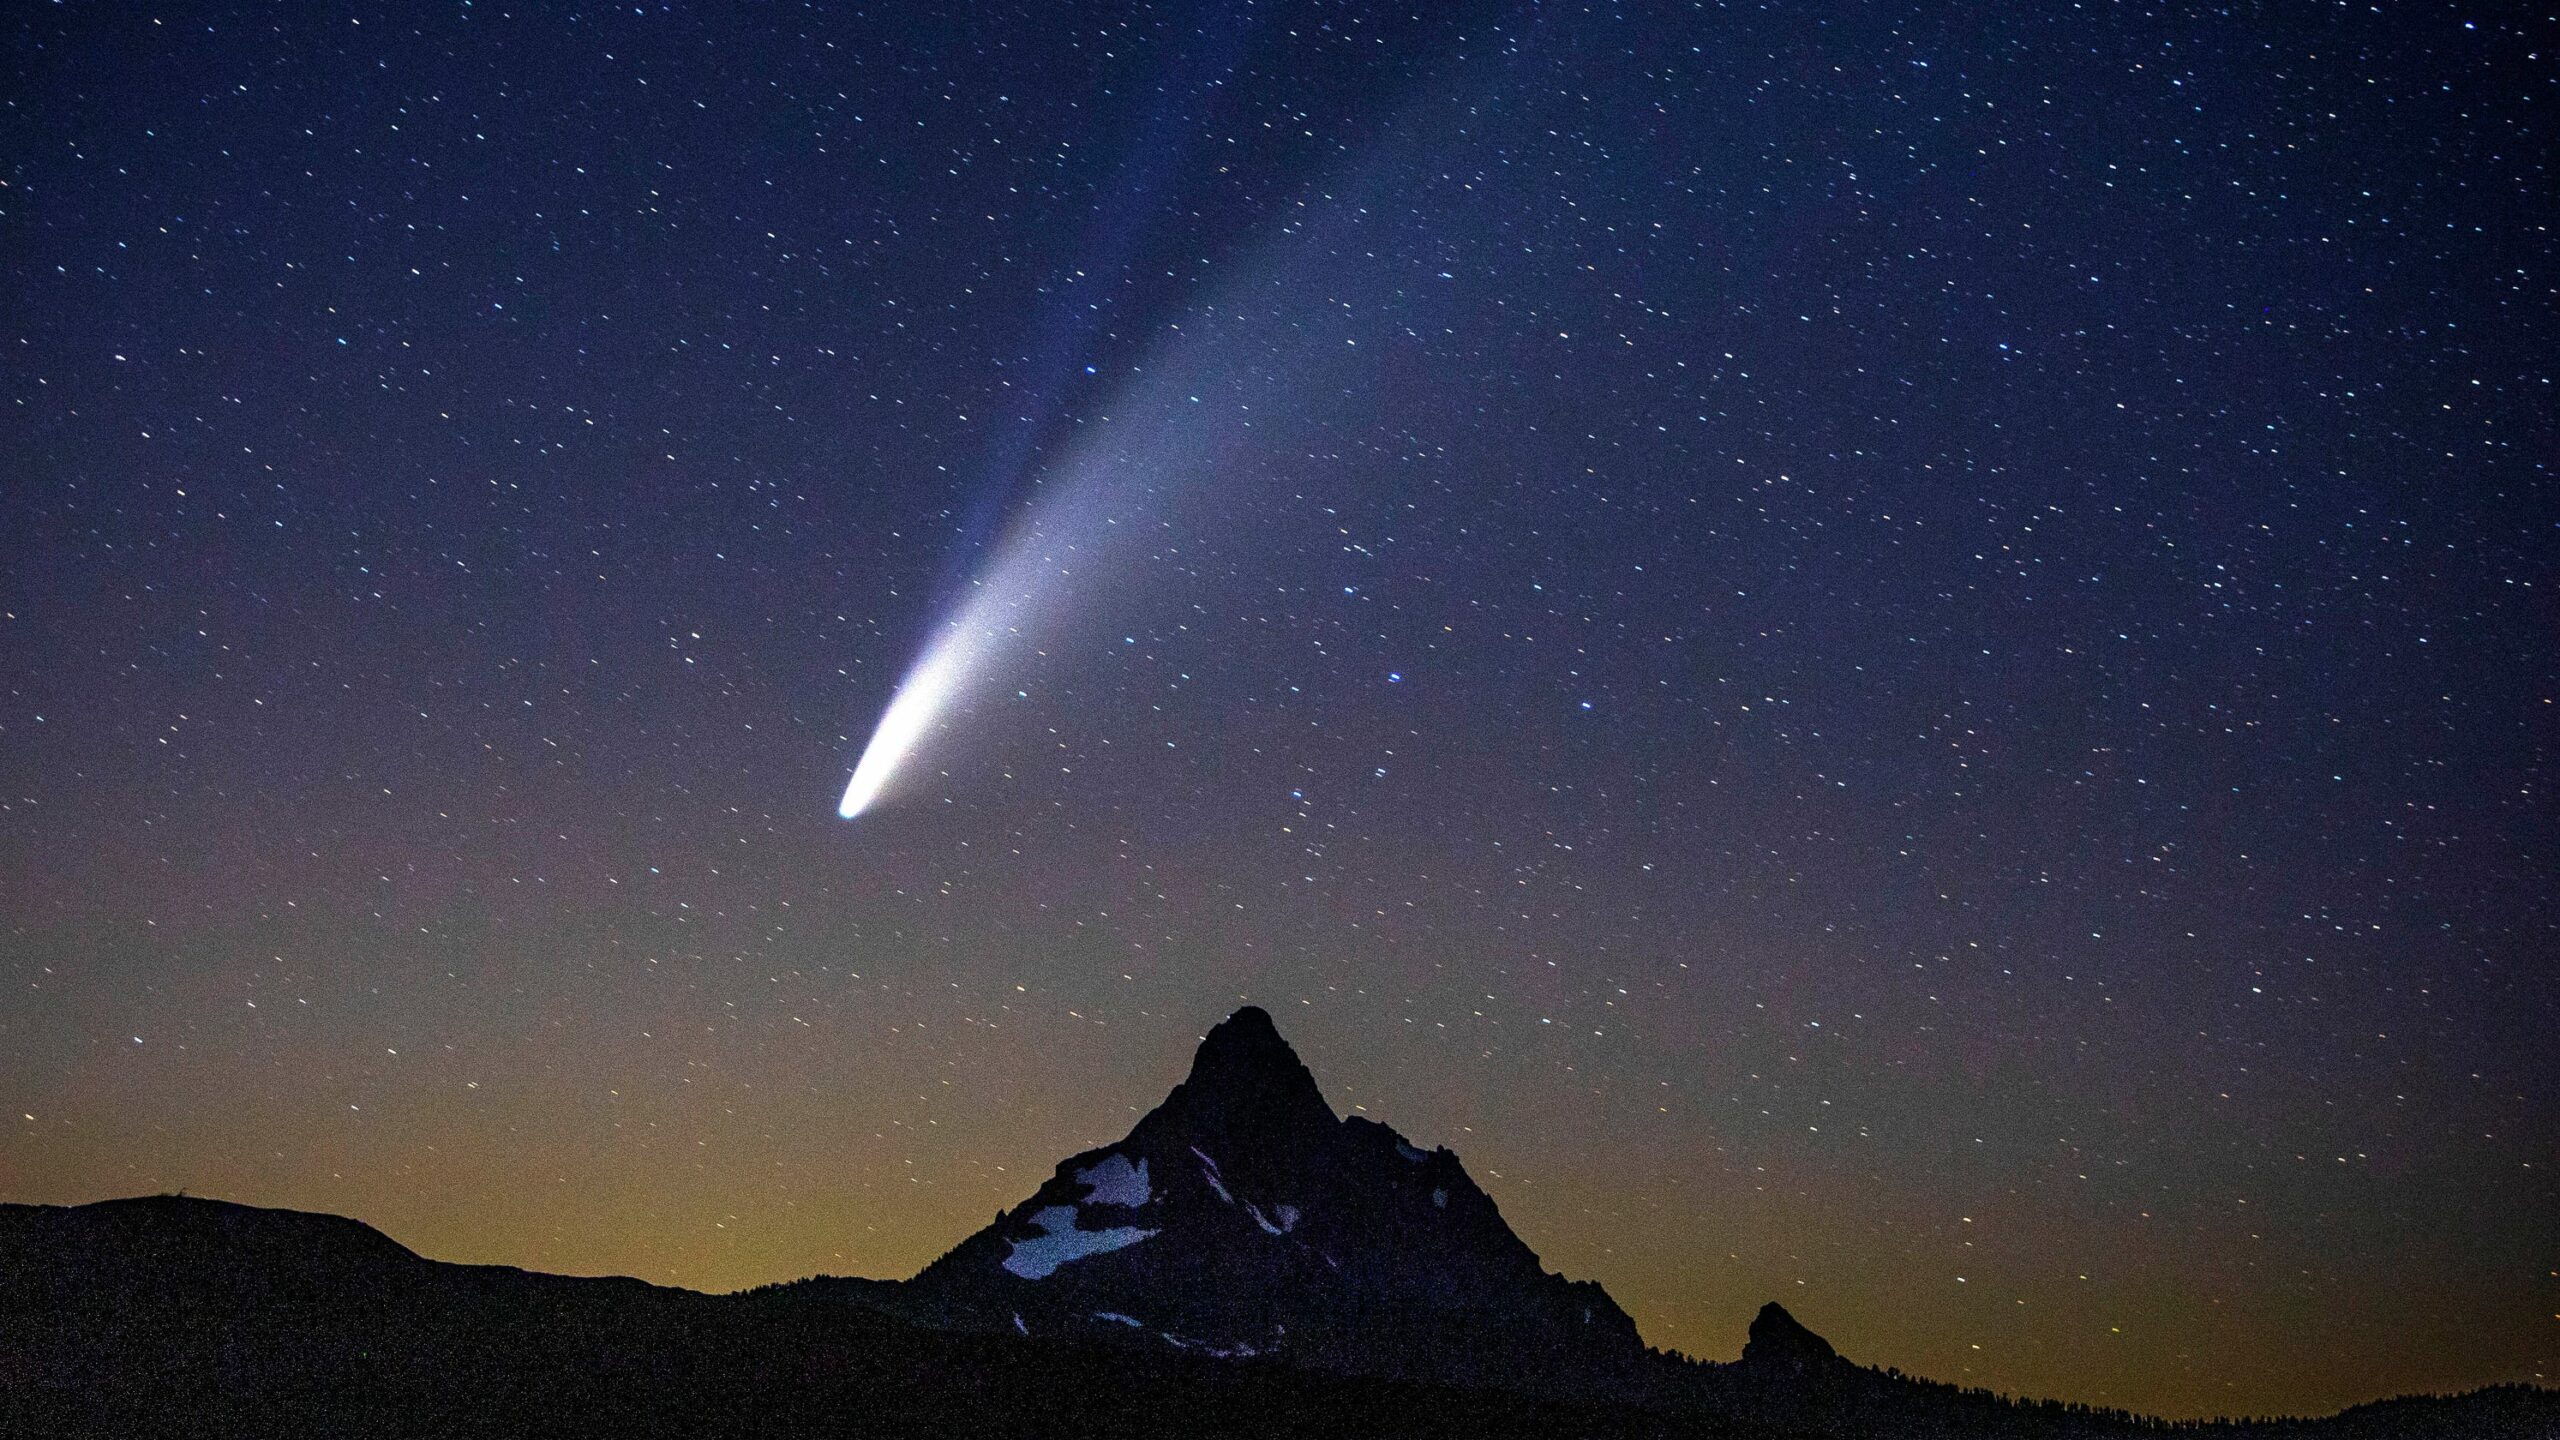 How to see it and uncover in the sky before it disappears